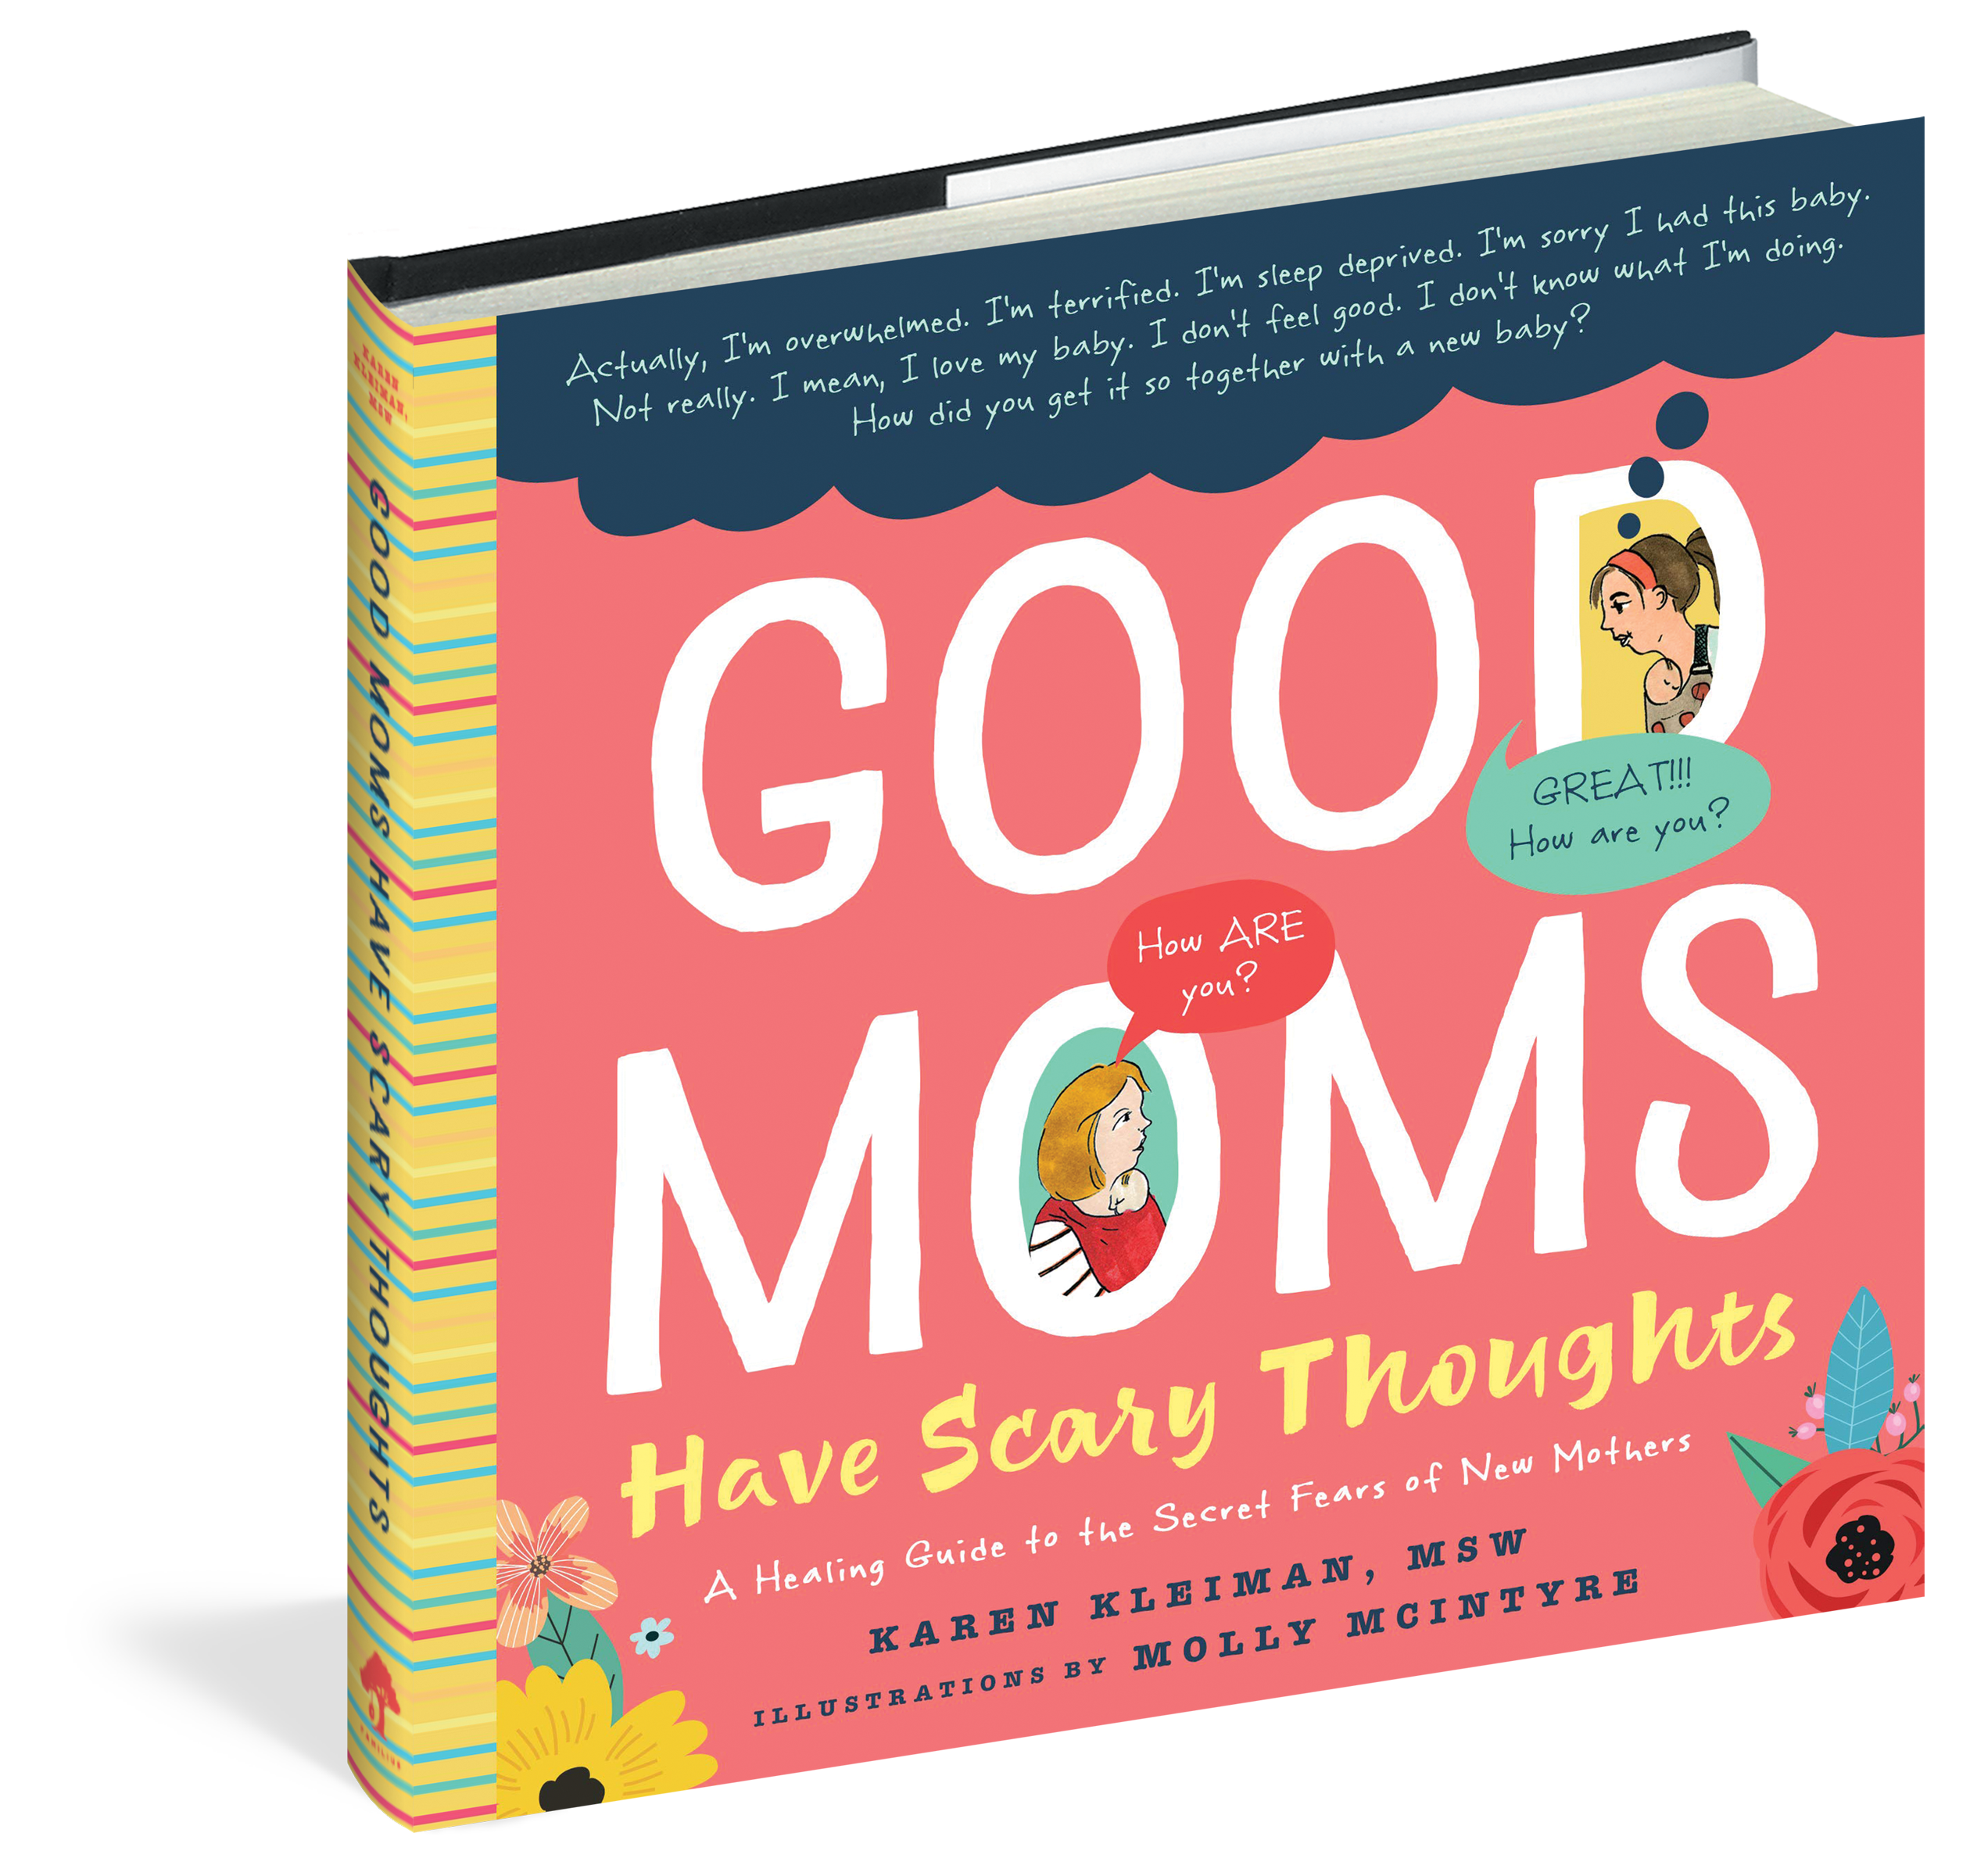 The cover of the book Good Moms Have Scary Thoughts.